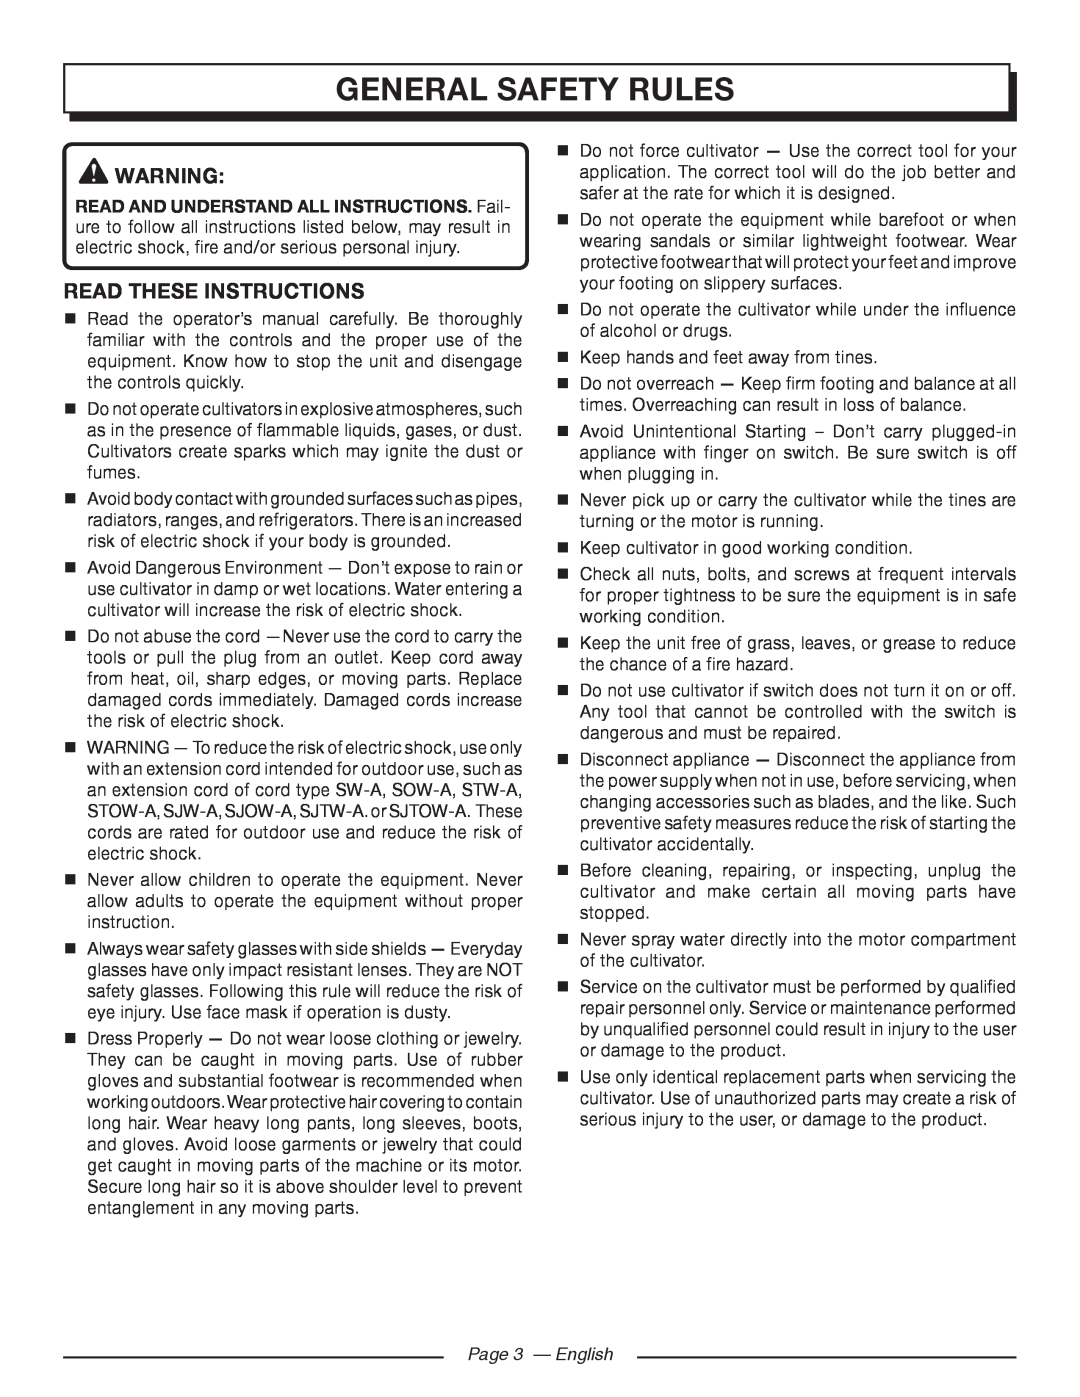 Homelite UT46510 manuel dutilisation general safety rules, read These Instructions, Page 3 - English 